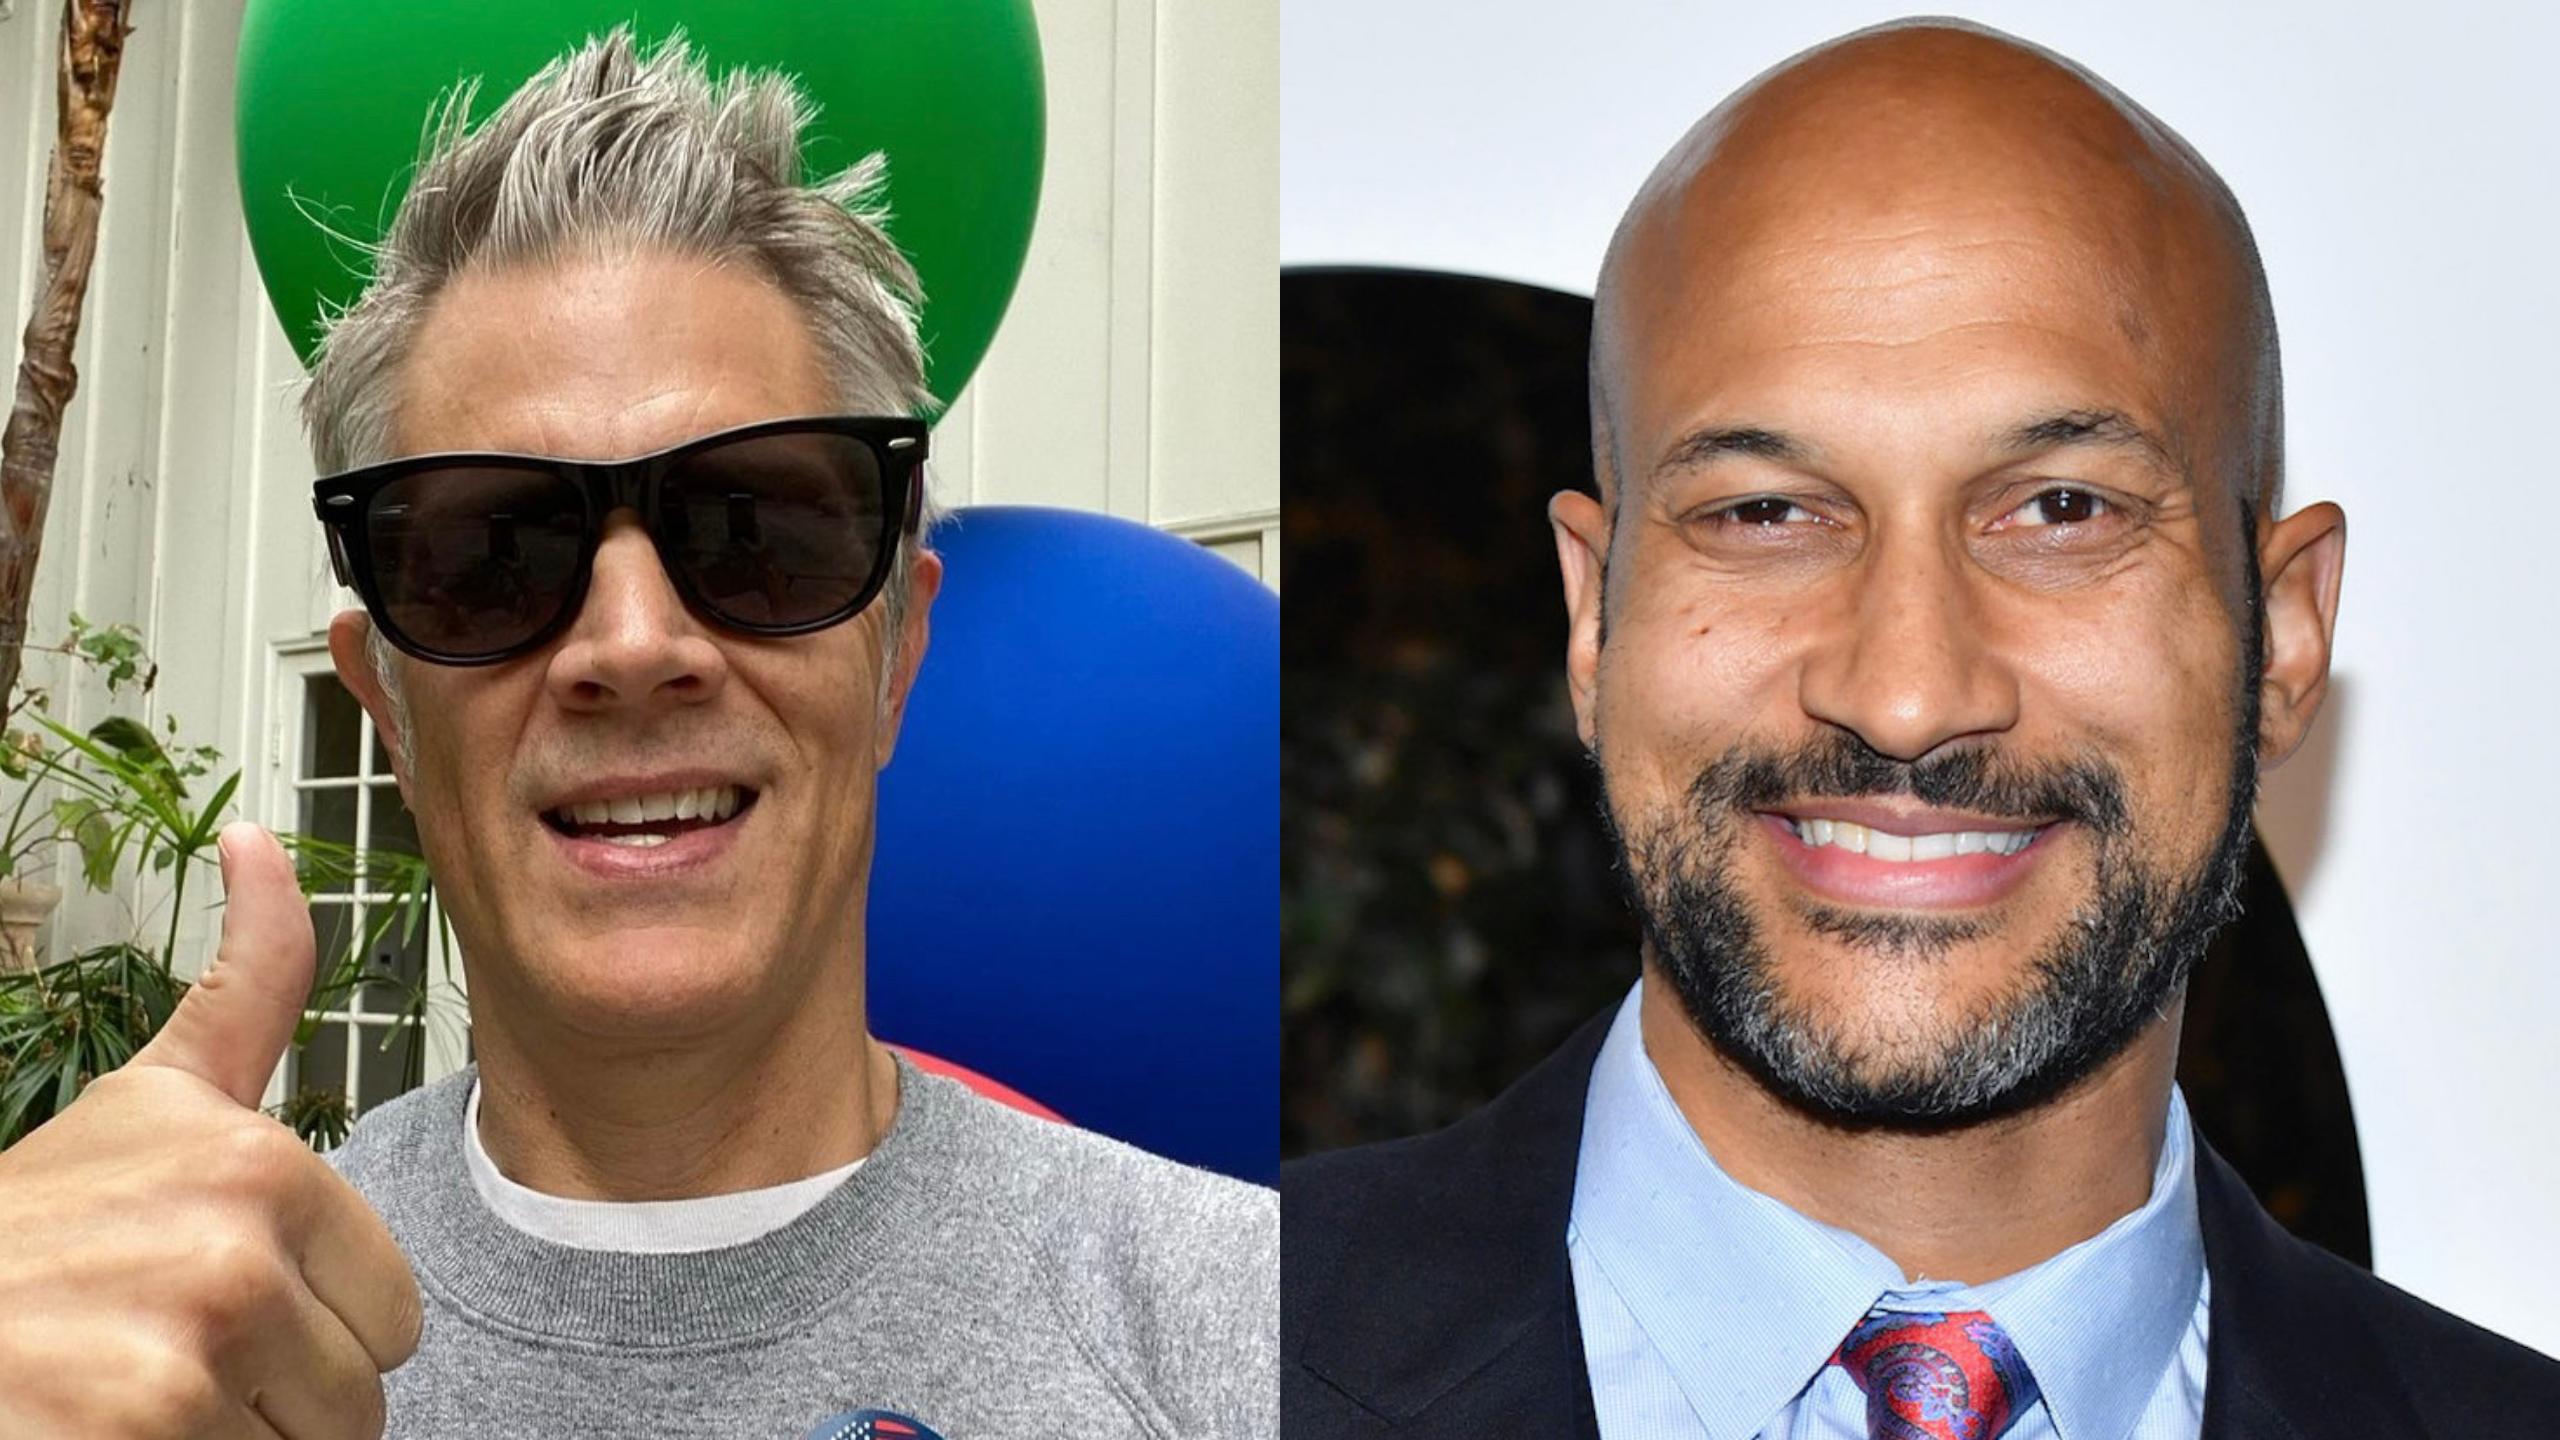 Keegan-Michael Key and Johnny Knoxville to Star in Comedy Pilot Titled REBOOT